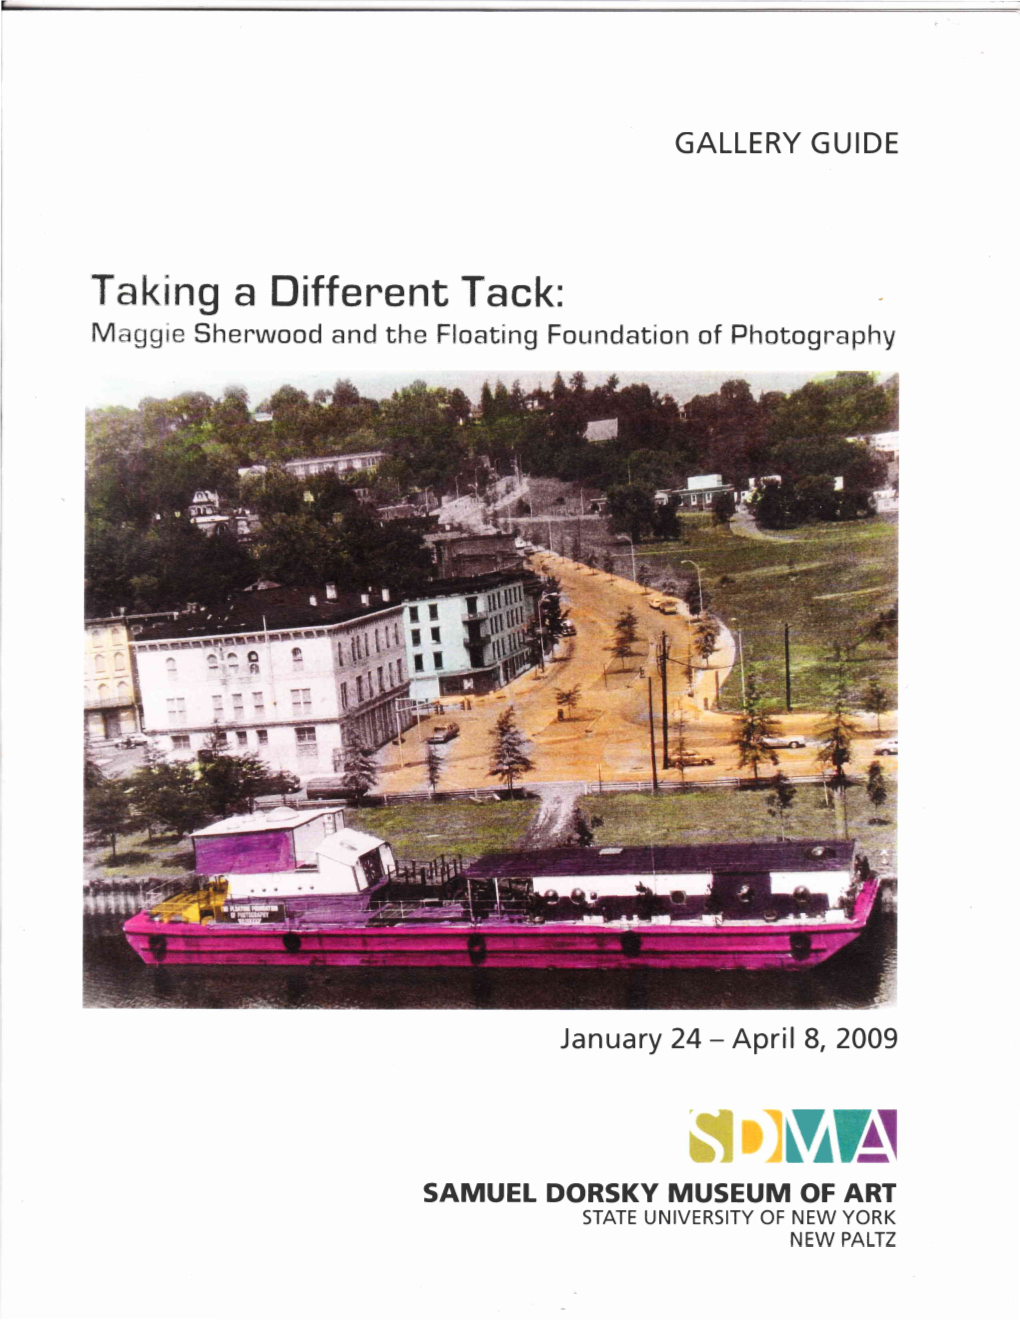 Taking a Diffenent Tack: Maggre Shenwood and the Floating Foundation of Photognaphy